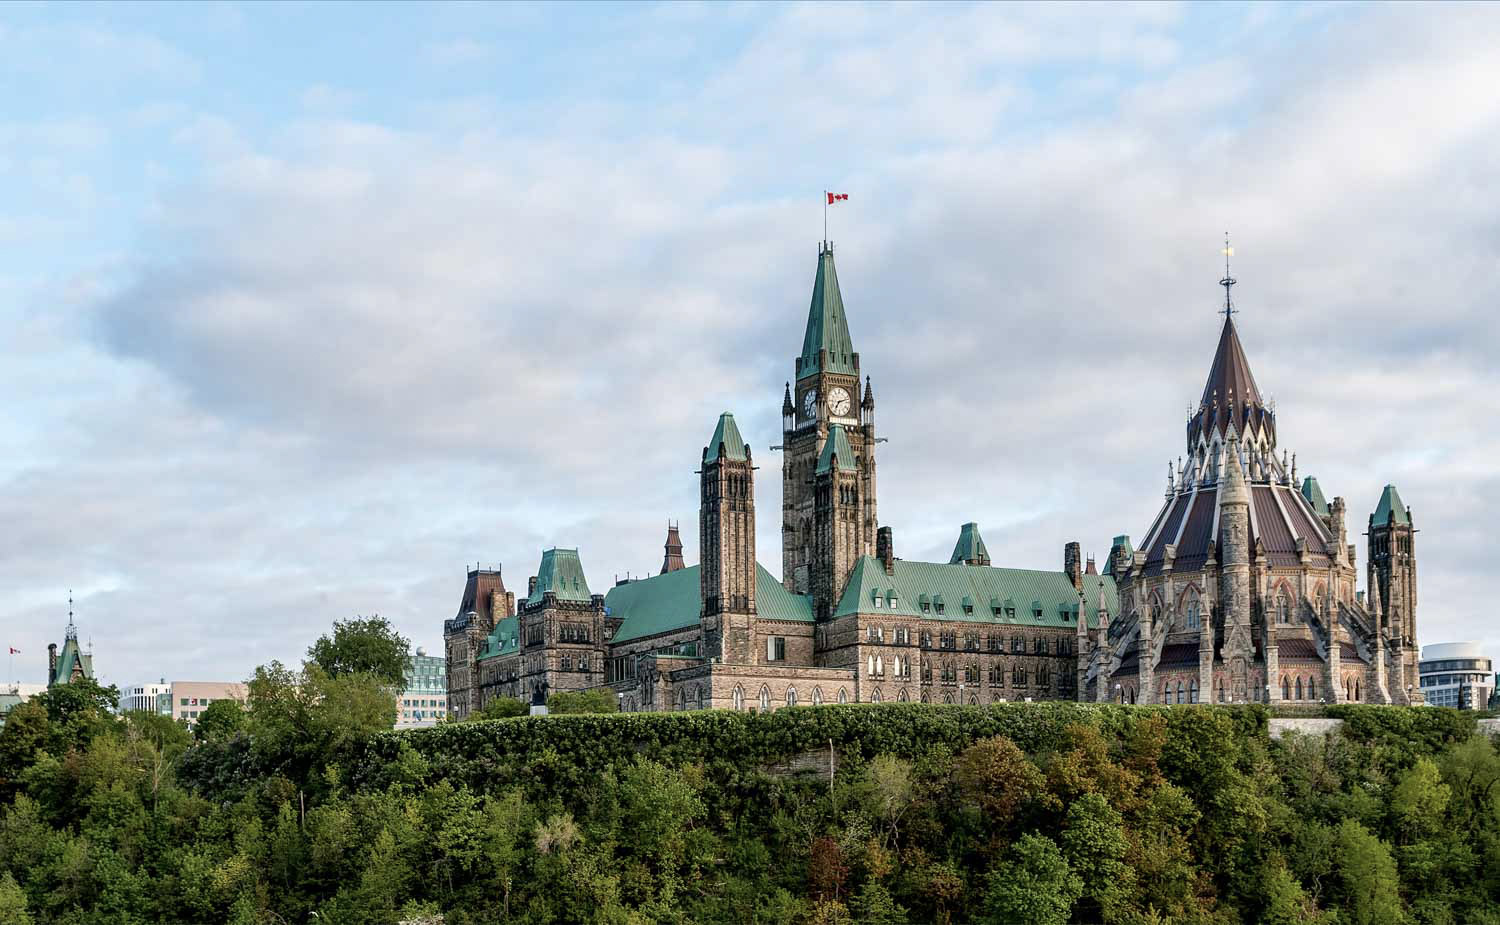 Parliament Hill - Ottawa, Ontario, Canada. Its Gothic revival suite of buildings is the home of the Parliament of Canada.